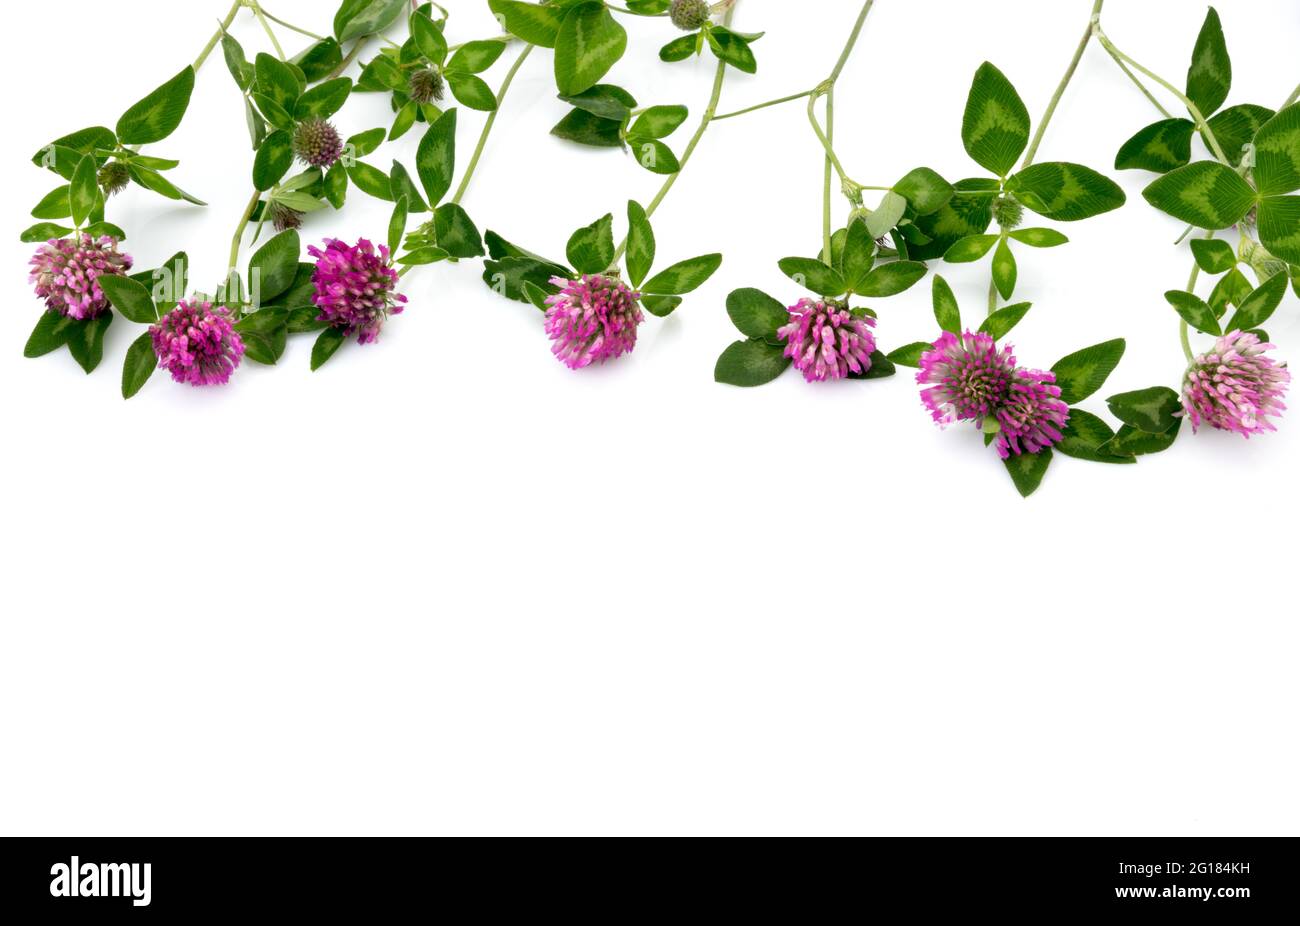 Clover flowers isolated on white, high border of flowers and leaves and text space below, copy space Stock Photo